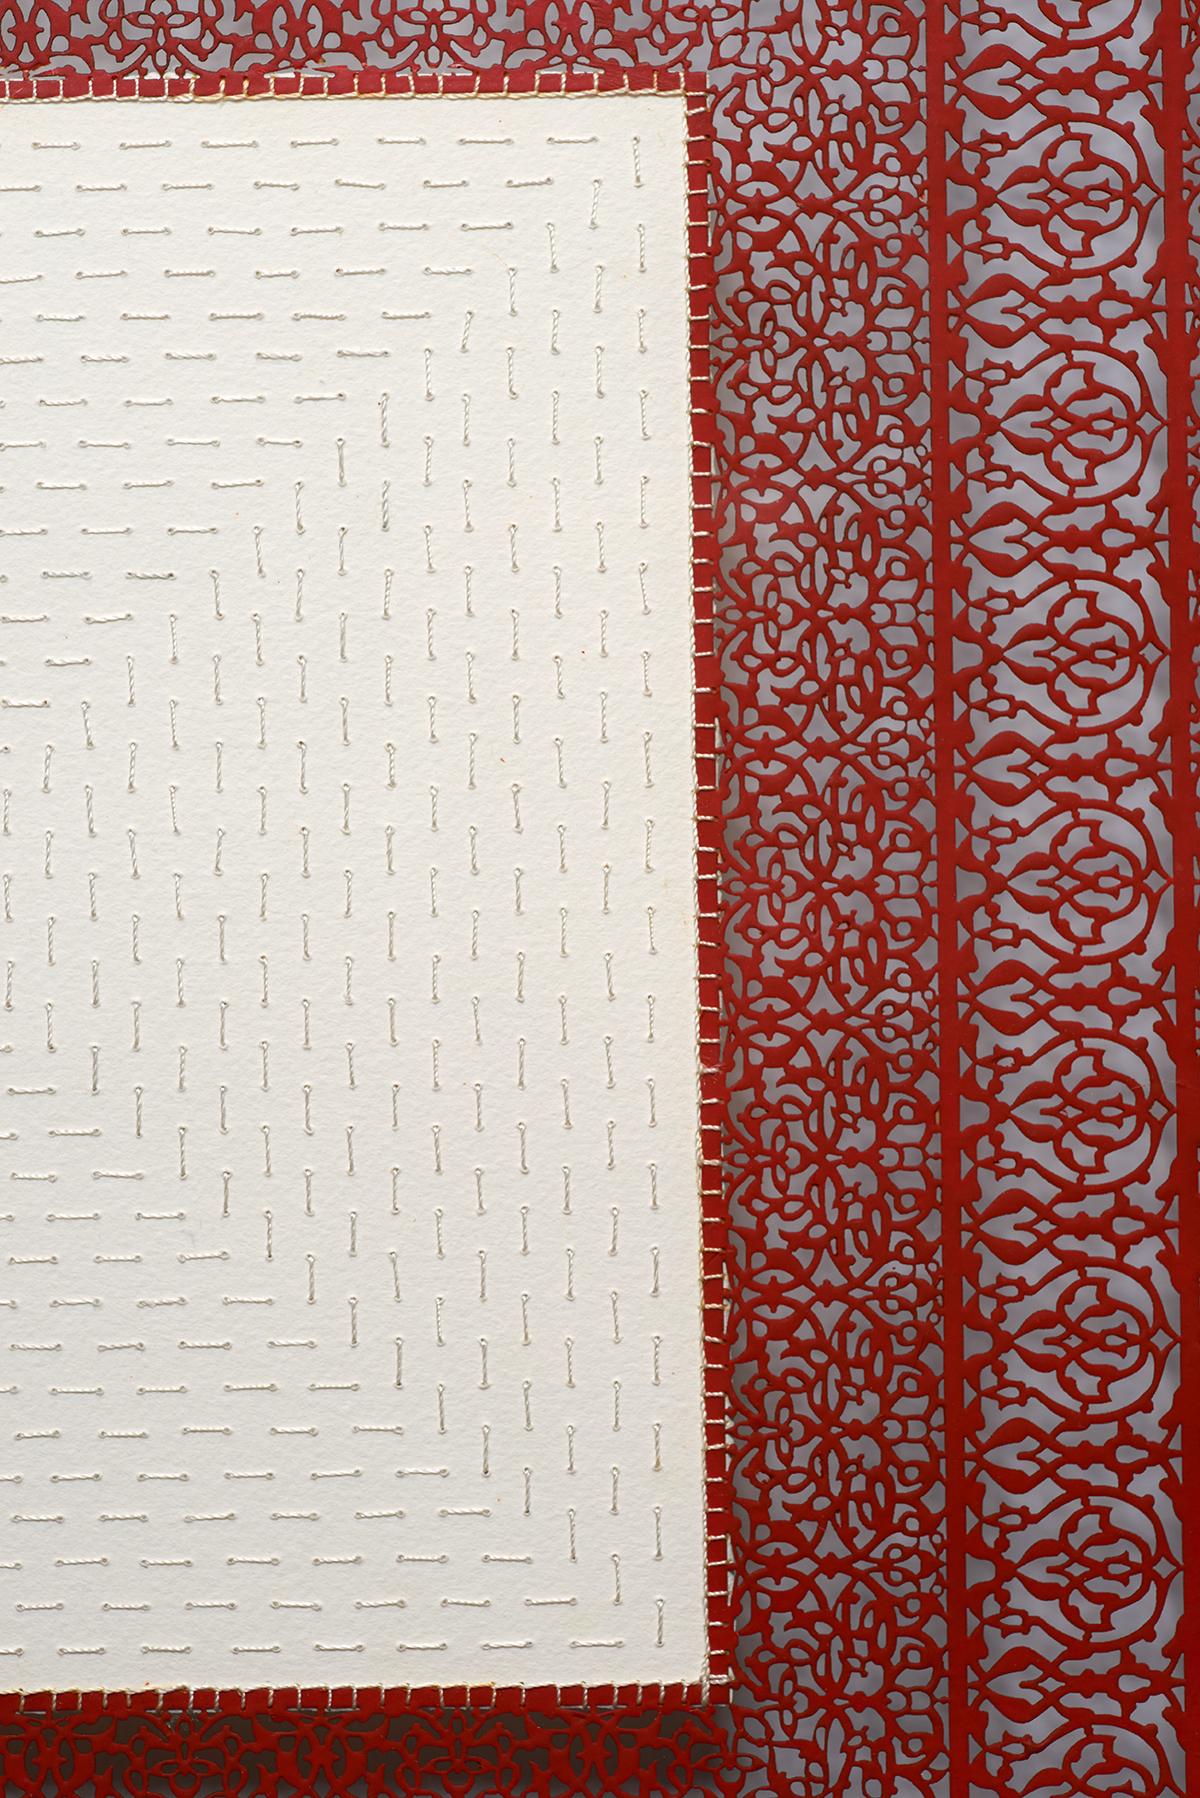 Laser-cut encaustic red burgundy floral embroidery on paper - Abstract Geometric Painting by Anila Quayyum Agha